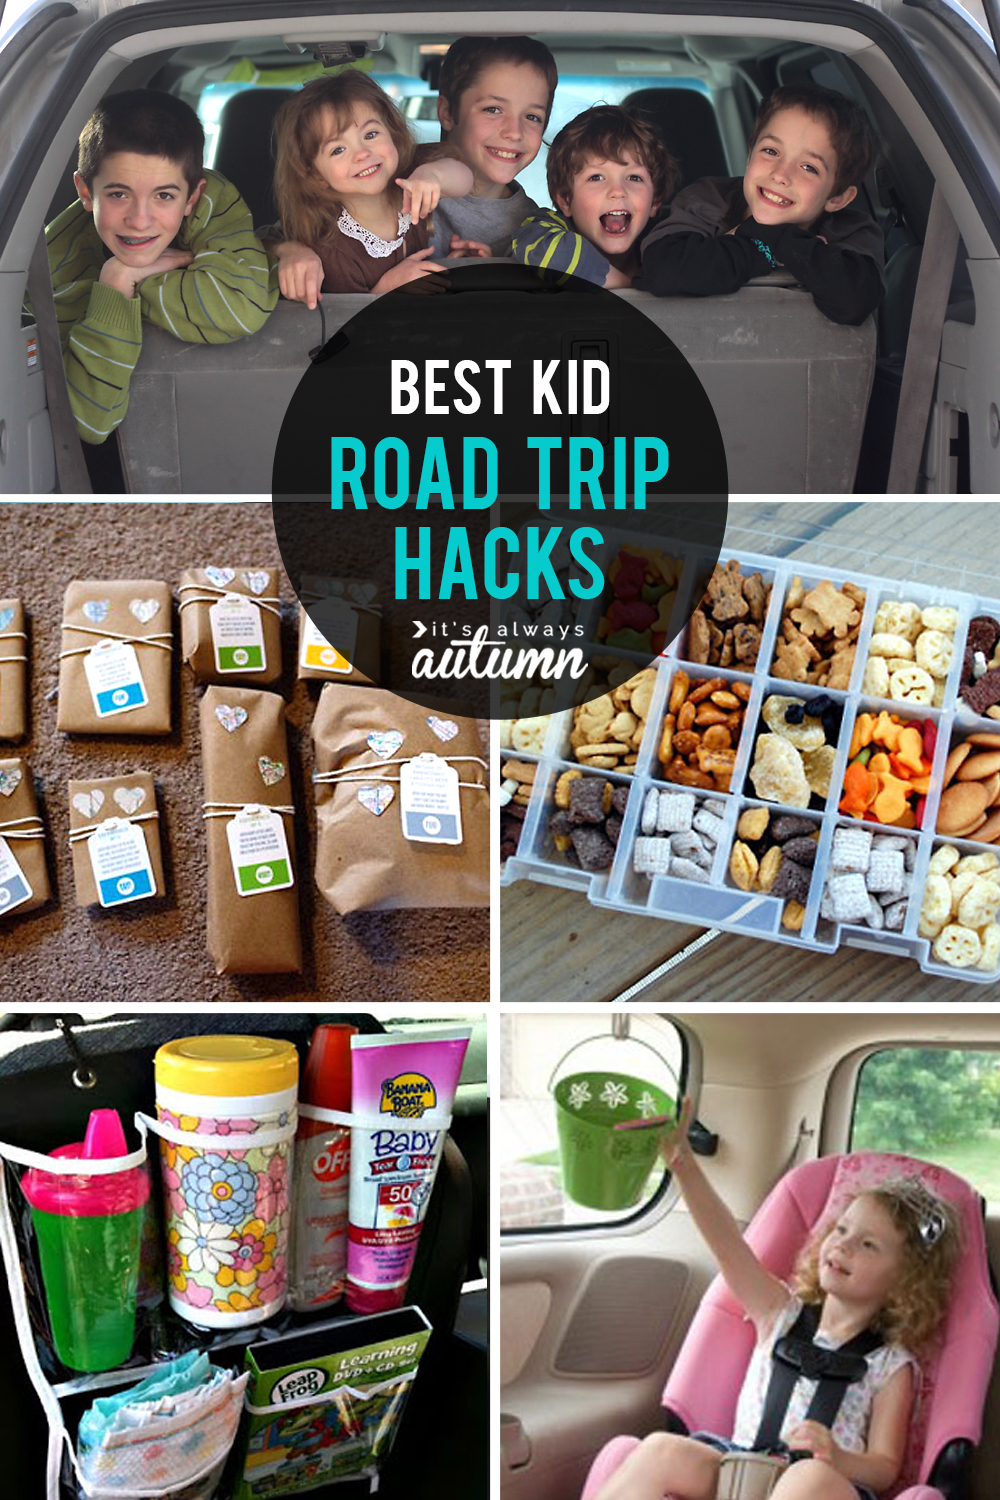 Best hacks for road trips for kids! Things to do, ways to stay organized, fun food, and more!